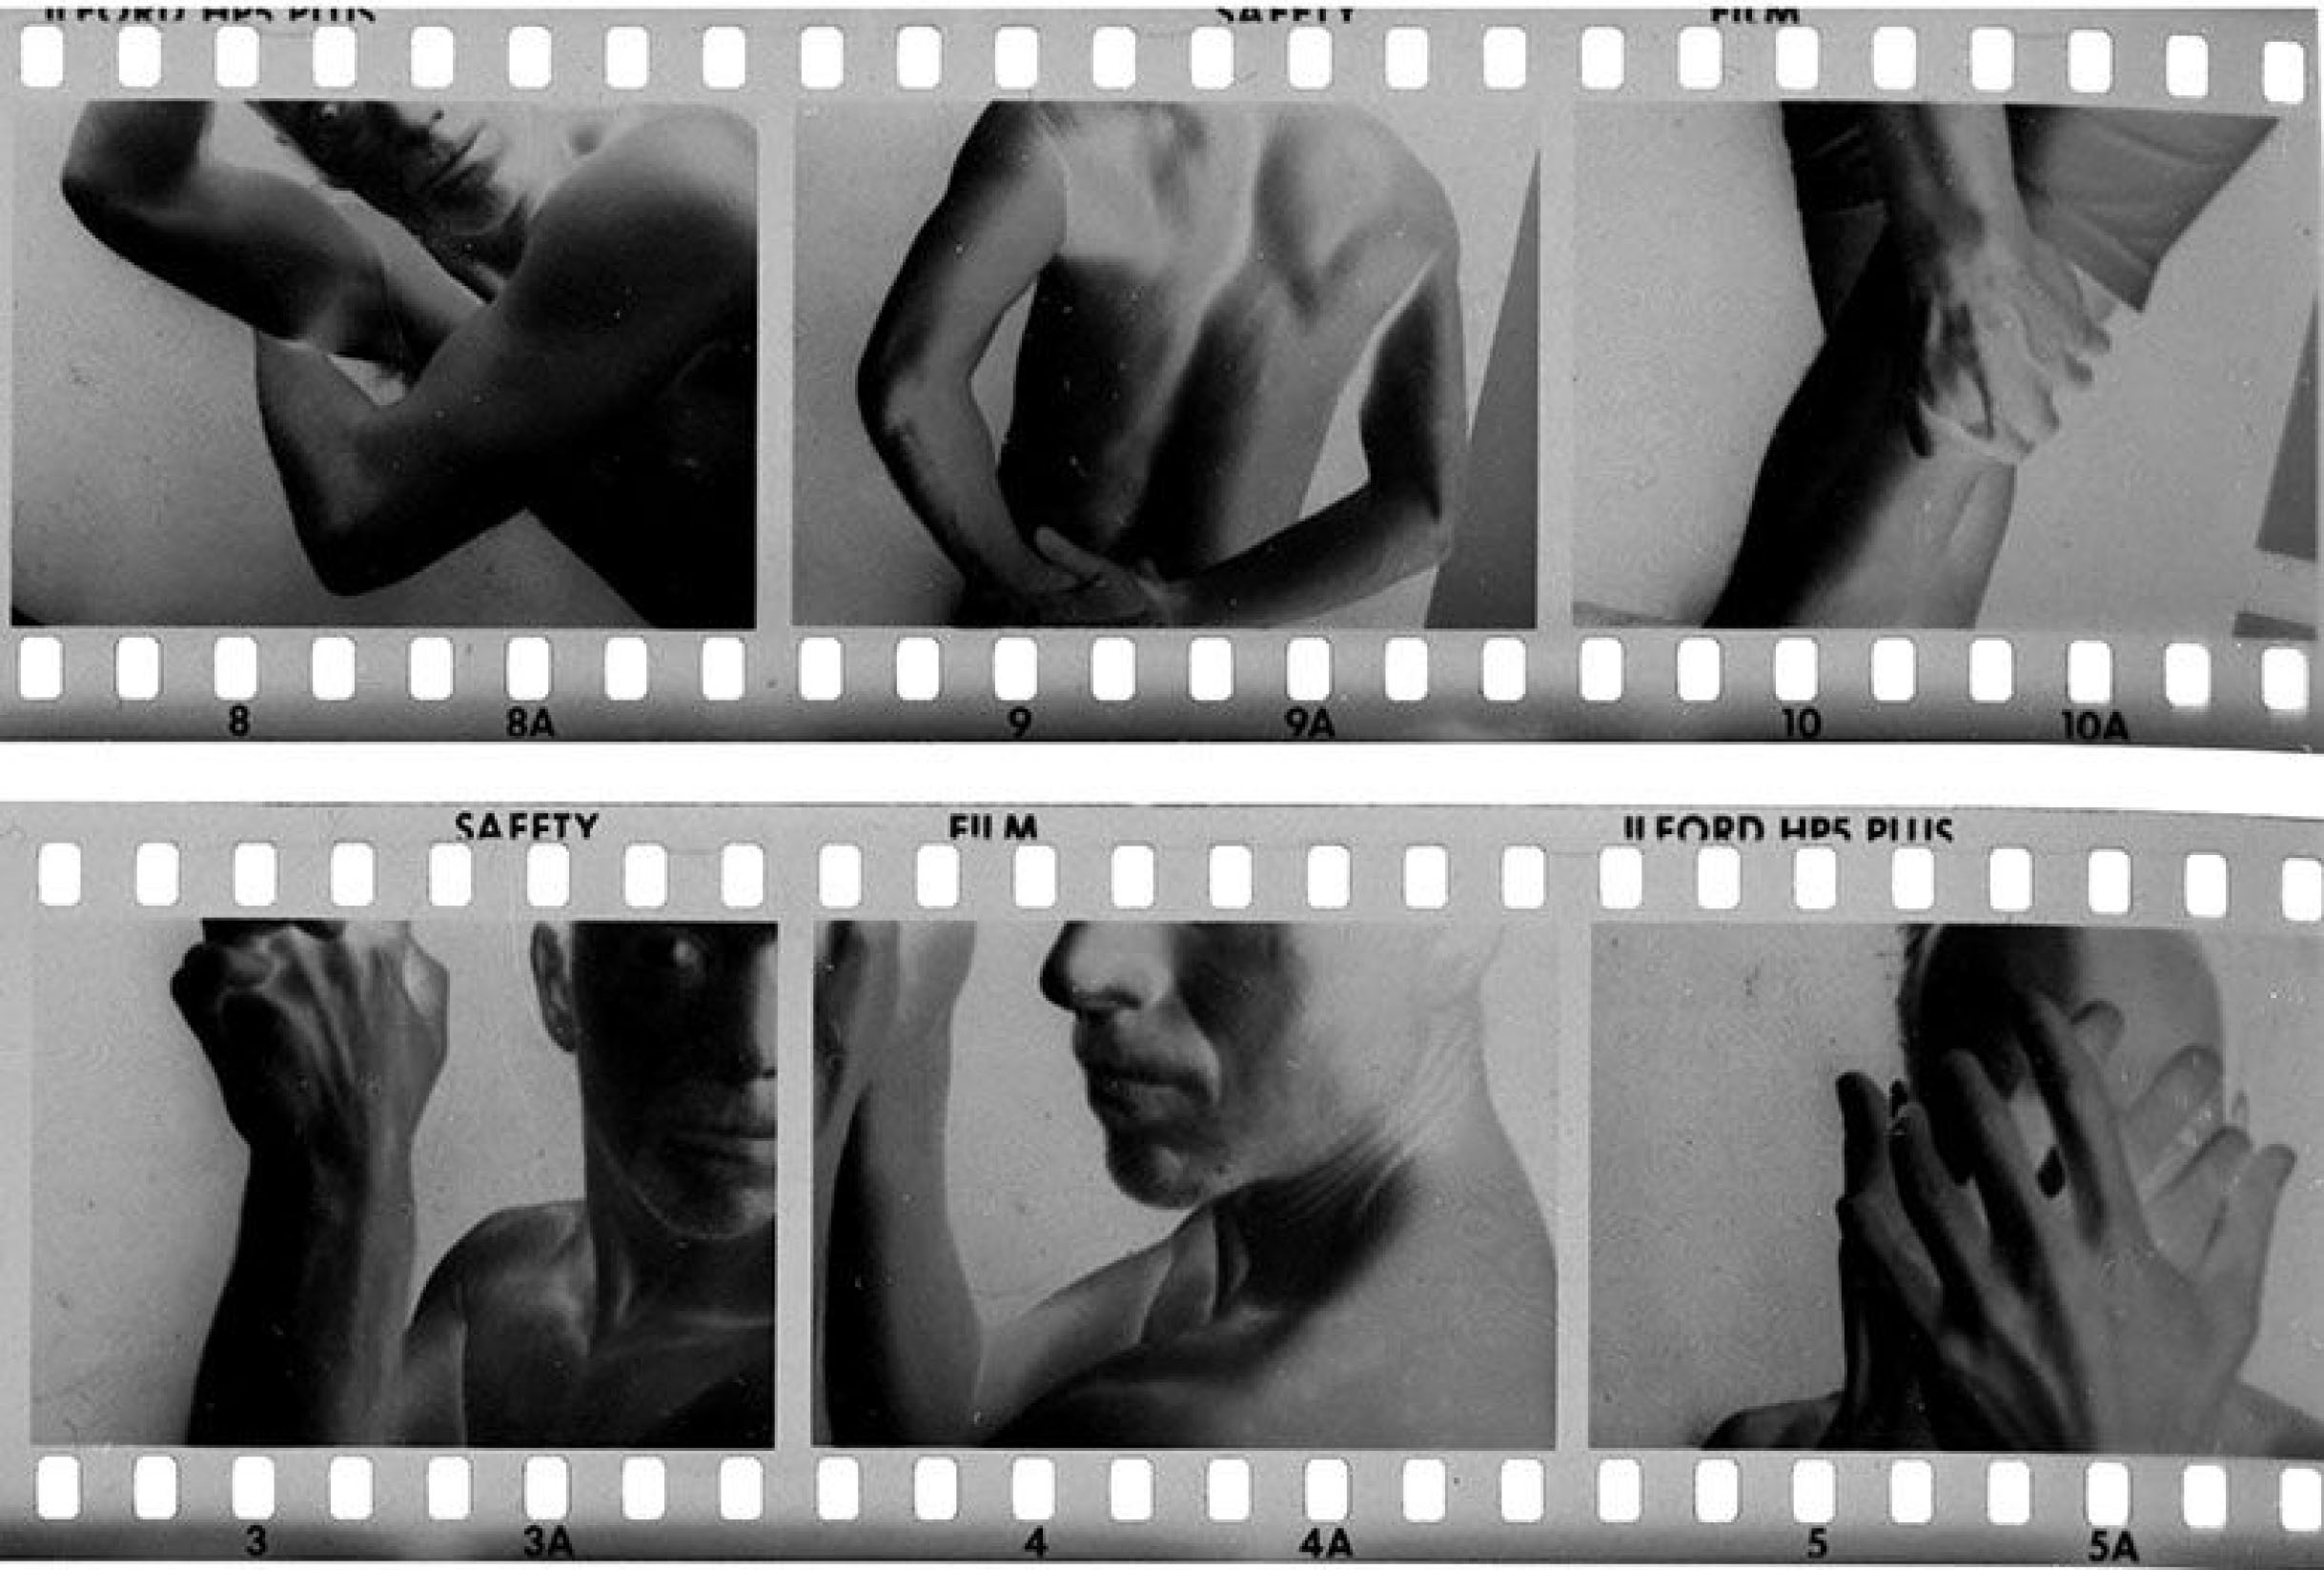 Untitled. Scans of a Model